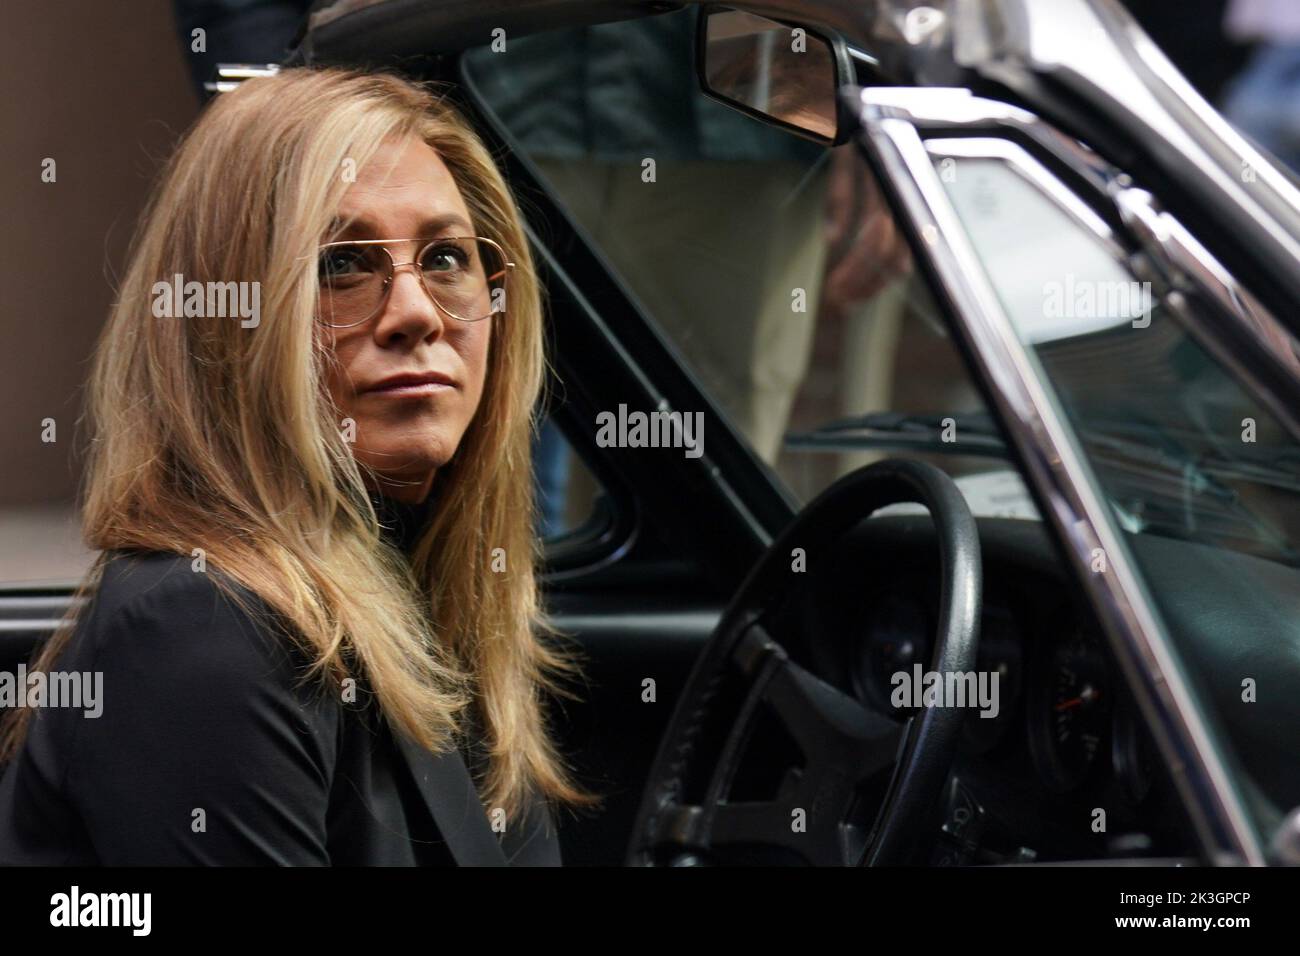 New York, NY, USA. 26th Sep, 2022. Jennifer Aniston on location for THE MORNING SHOW Shooting in NYC, Soho neighborhood in Manhattan, New York, NY September 26, 2022. Credit: Kristin Callahan/Everett Collection/Alamy Live News Stock Photo